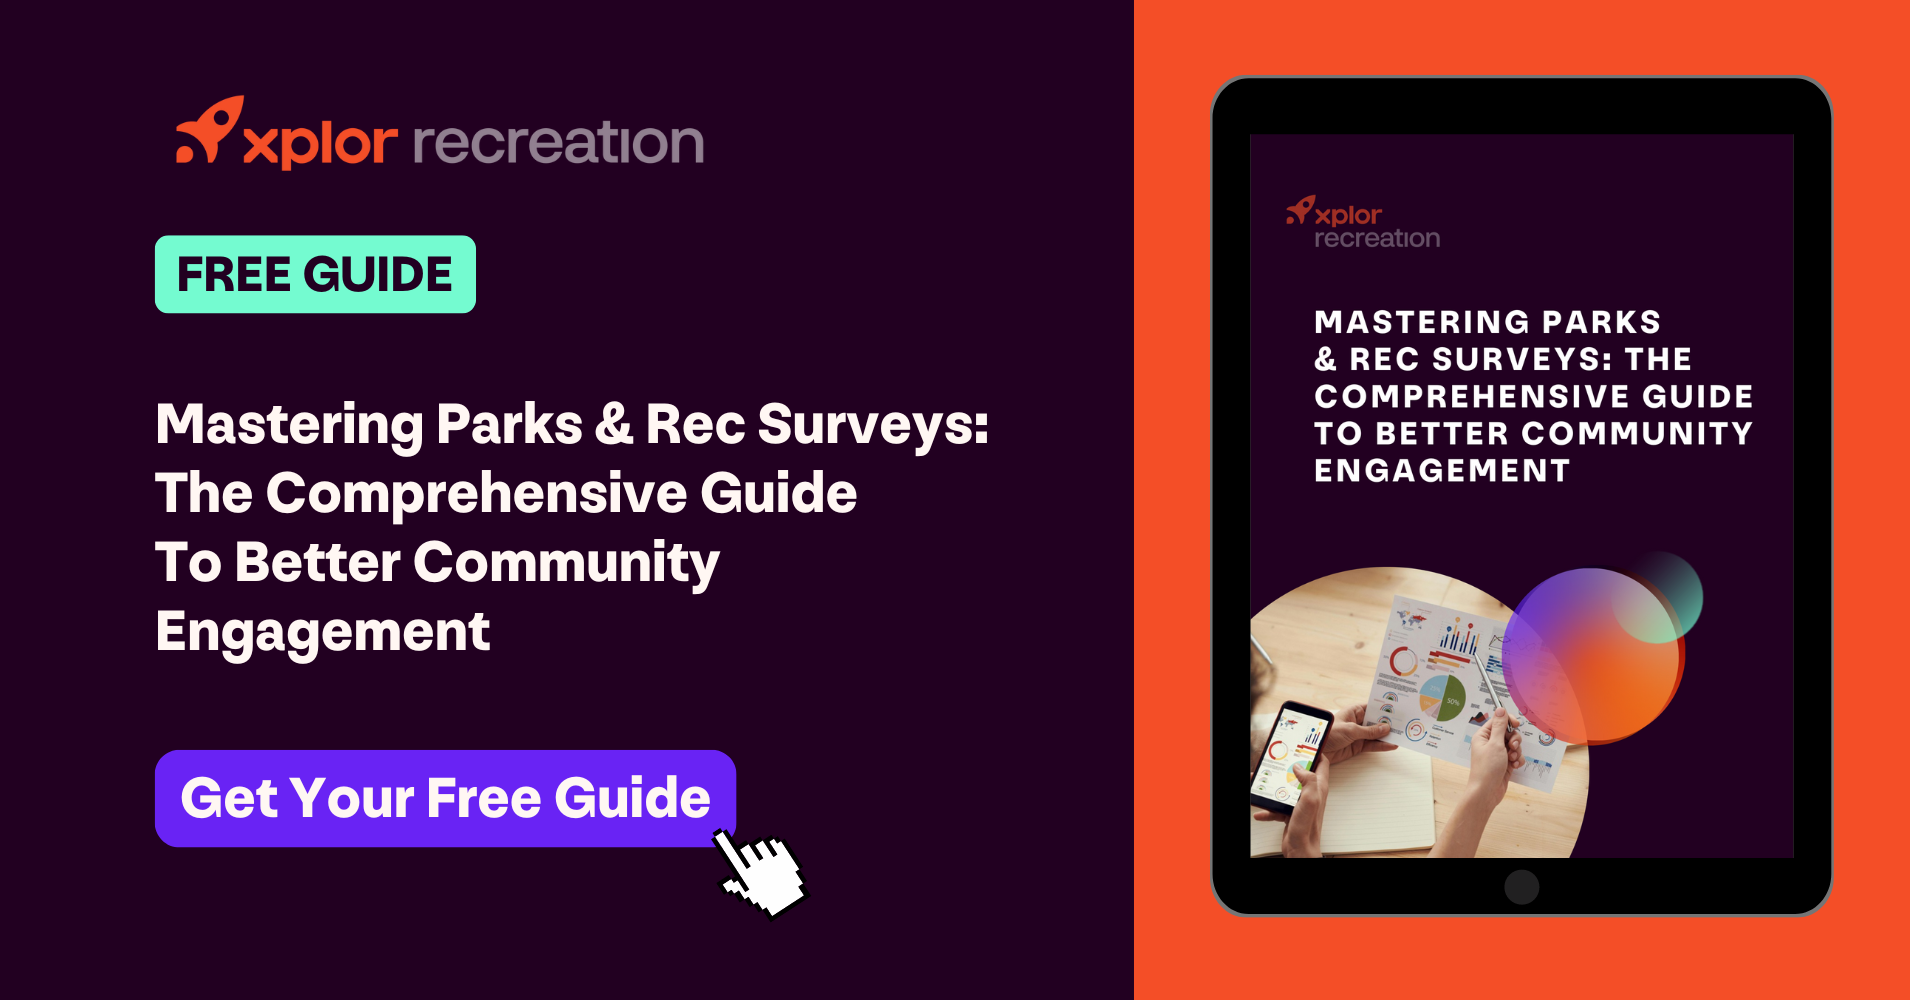 Advertisement for comprehensive parks and recreation survey guide including link to download